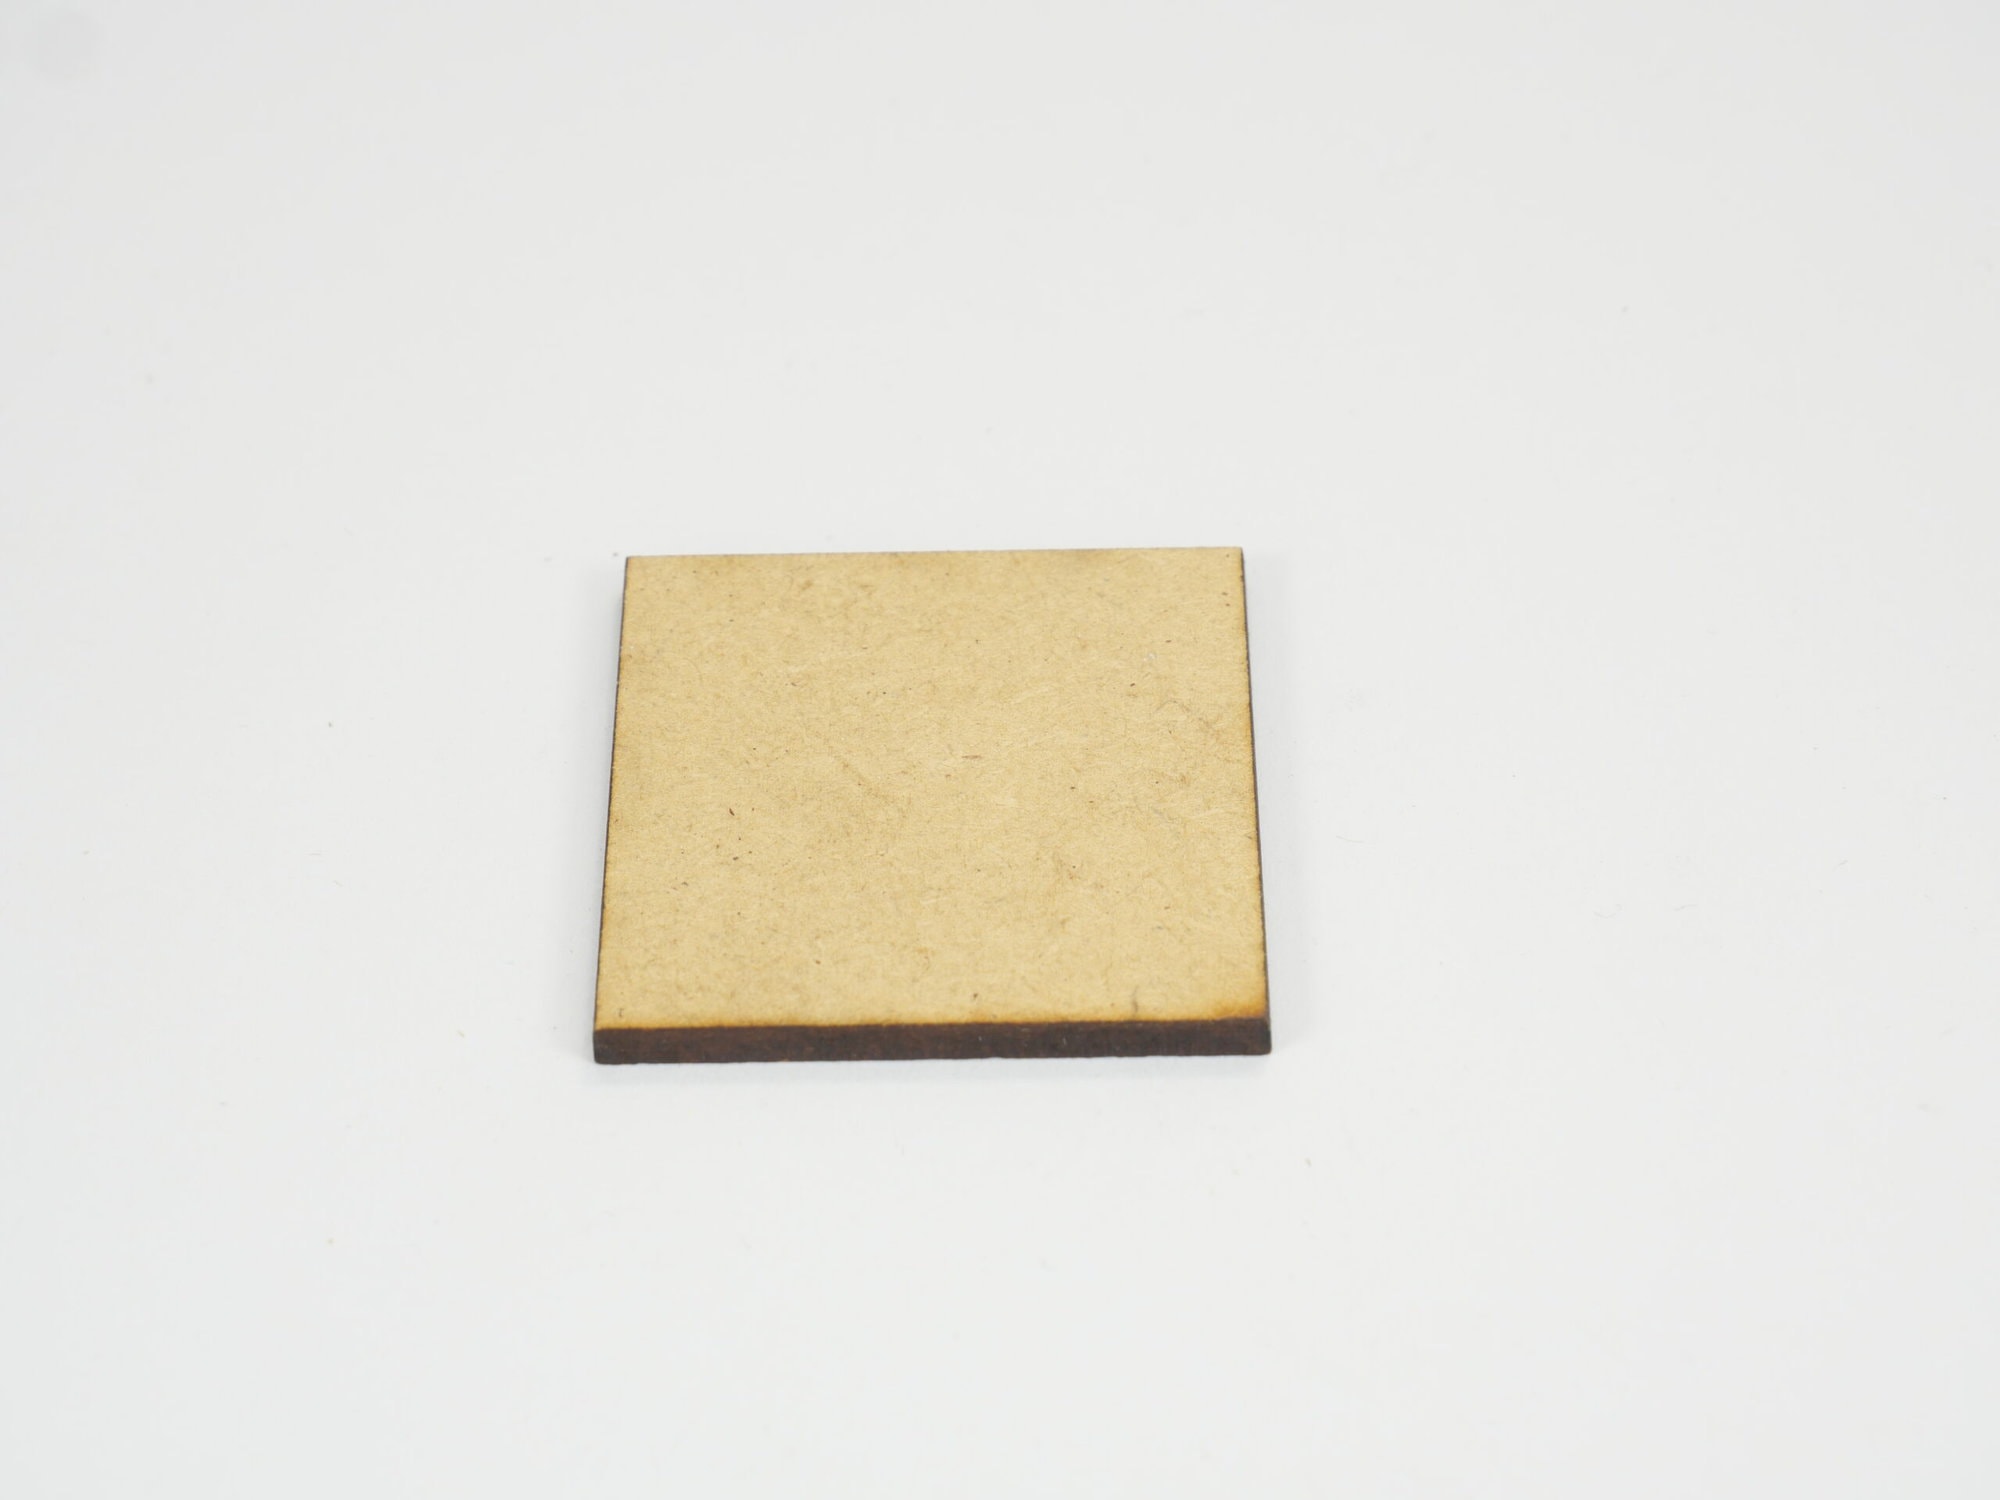 40mm Set of square bases